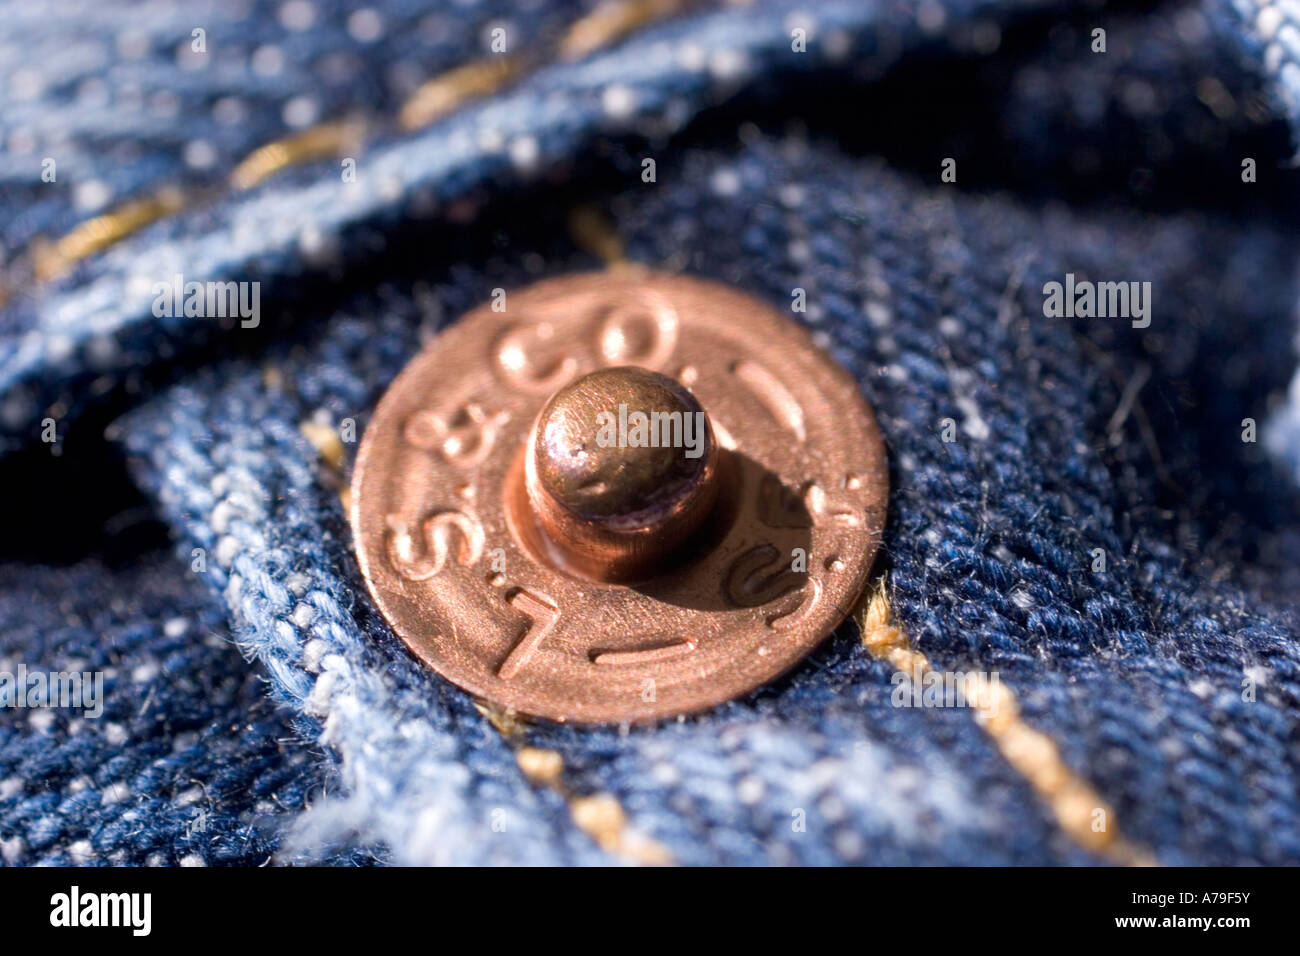 Levi jeans 501 501 s detail with close up of rivet Stock Photo - Alamy